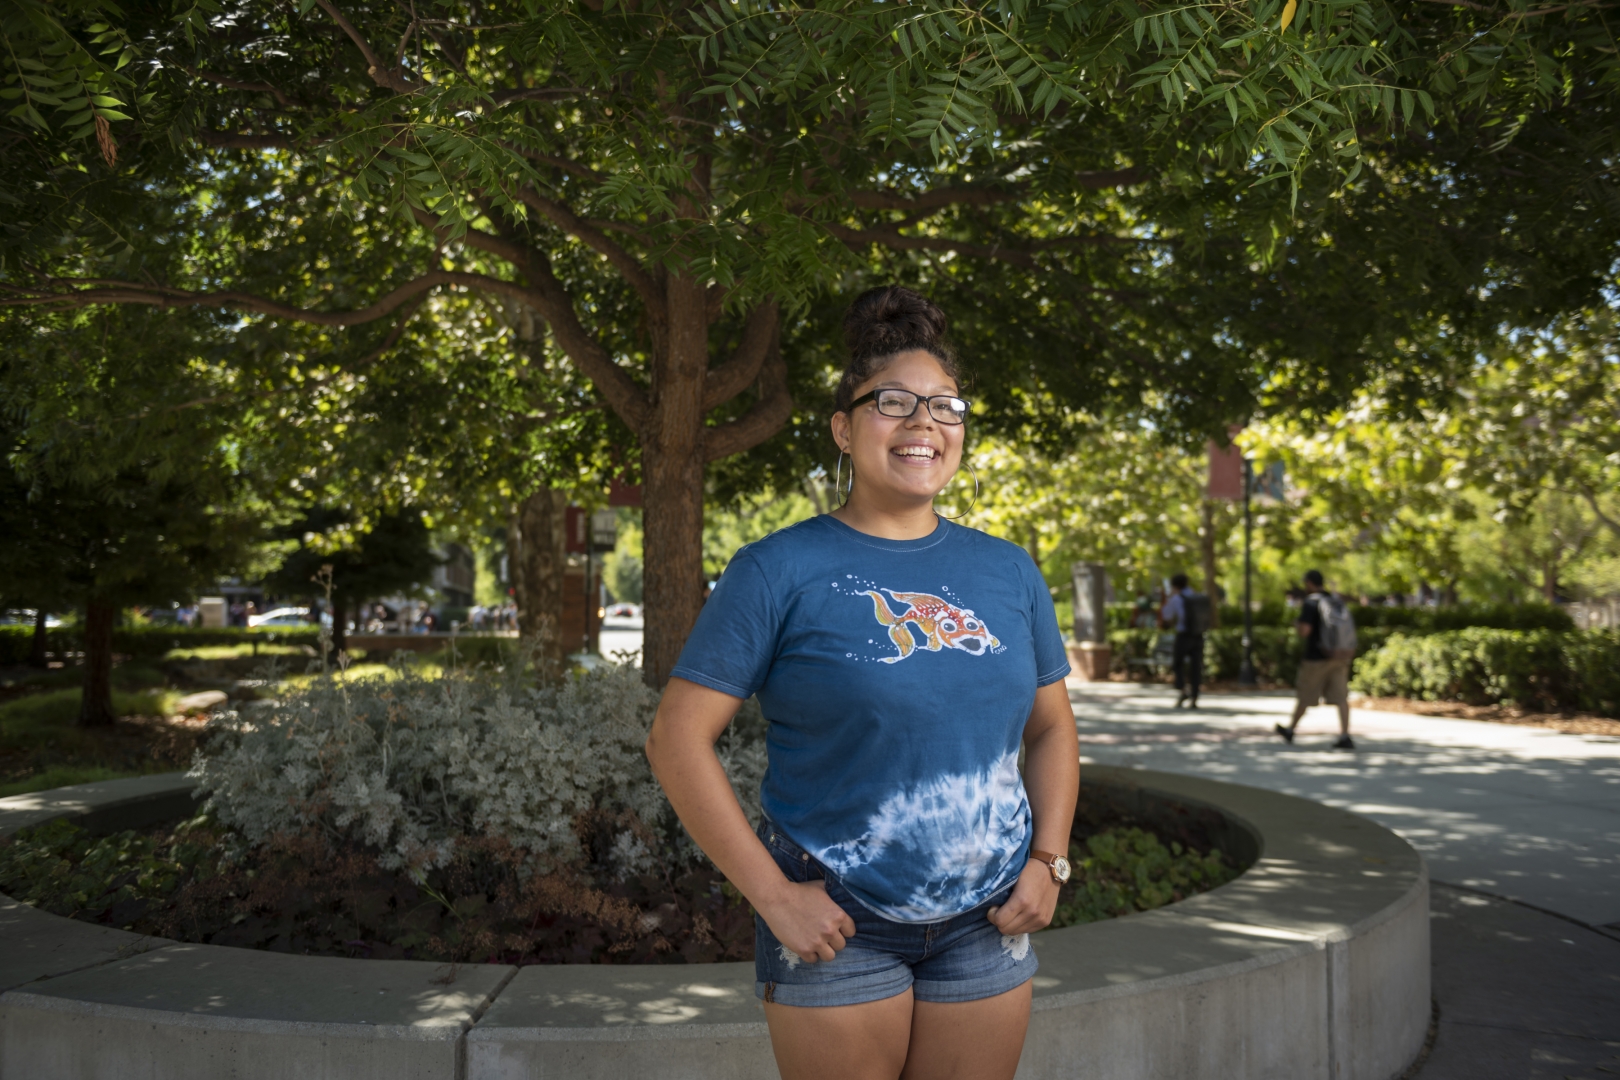 Jacklynn Rodriguez smiles and stands in front of a tree planter box on campus